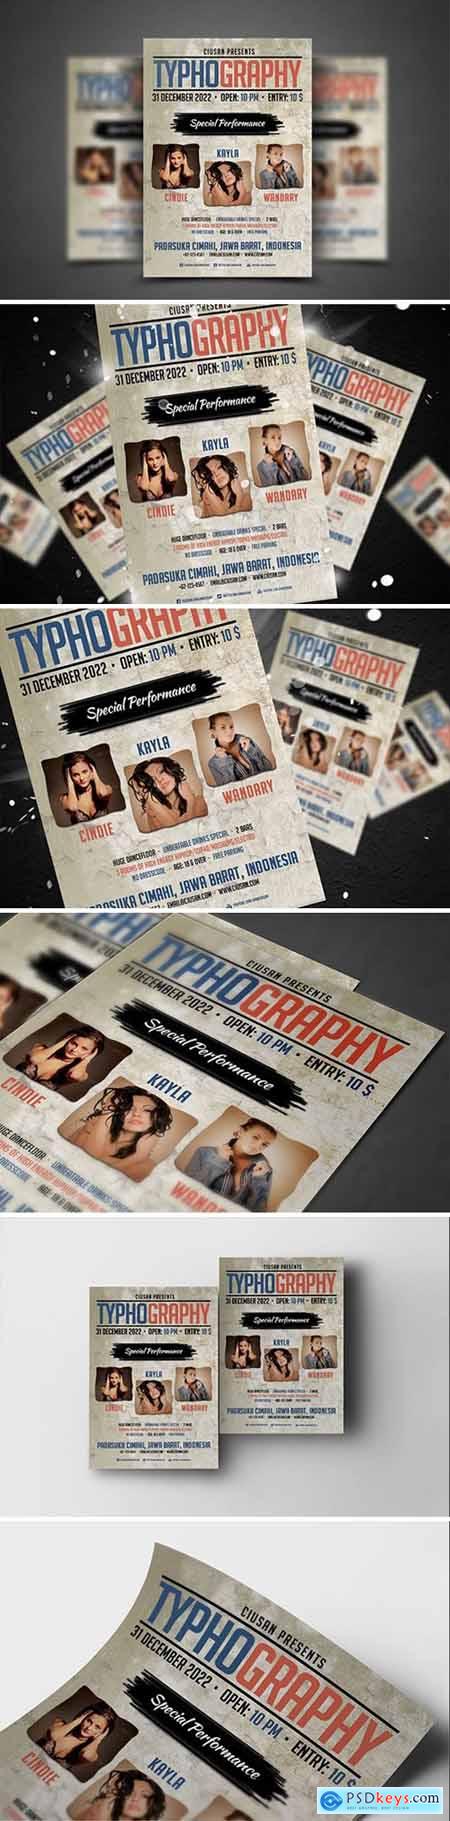 Typhography Flyer Template 3963612